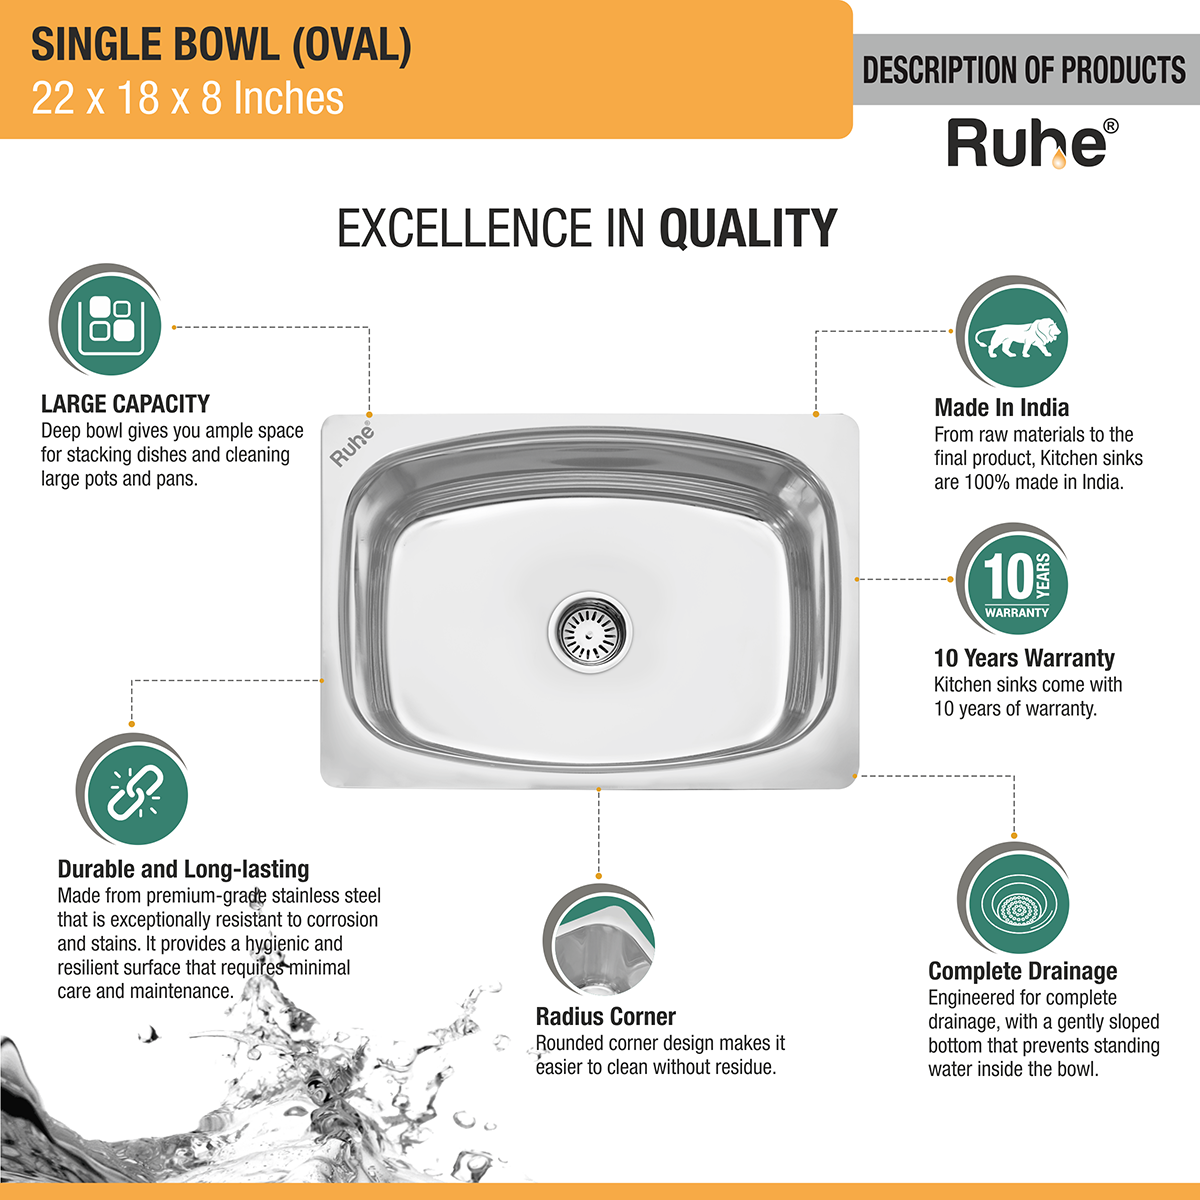 Oval Single Bowl (22 x 18 x 8 inches) 304-Grade Kitchen Sink description of products